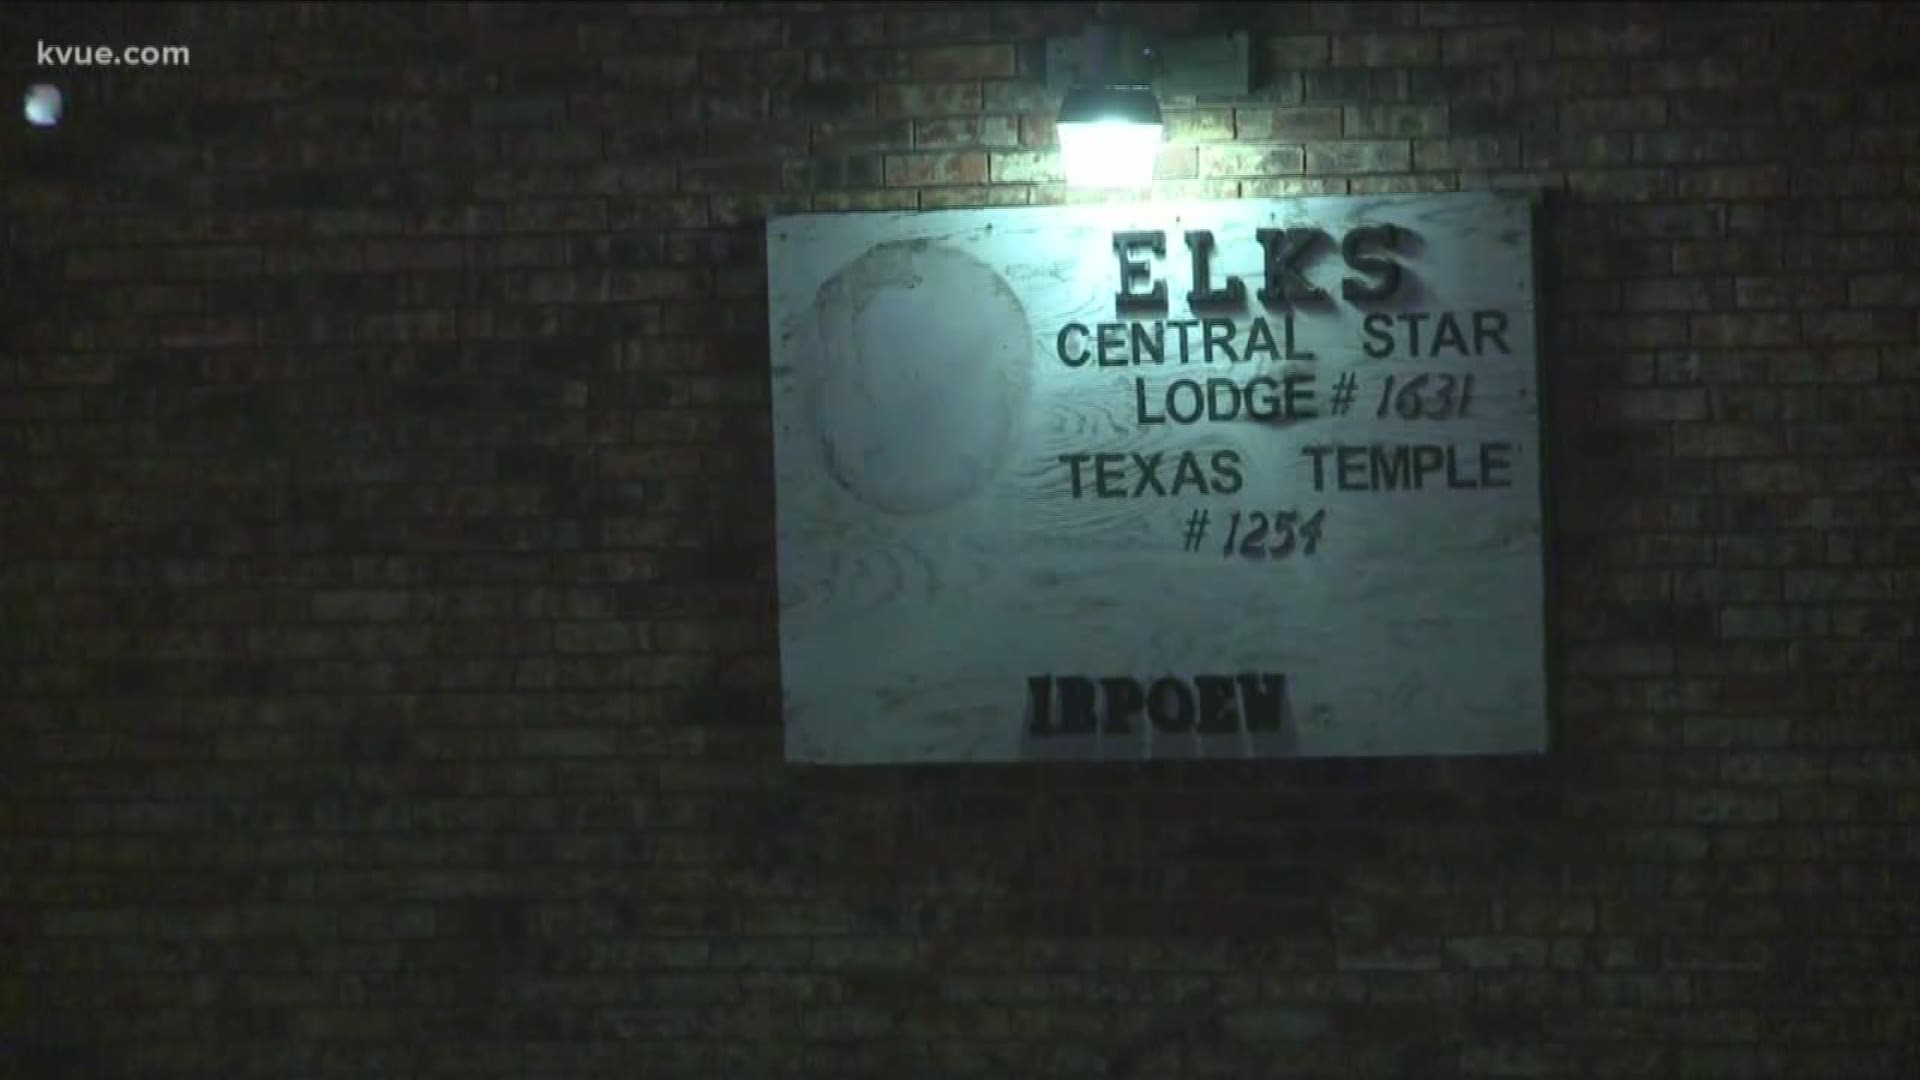 One person is in custody after a stabbing at Elks Lodge near Highway 290 in East Austin.